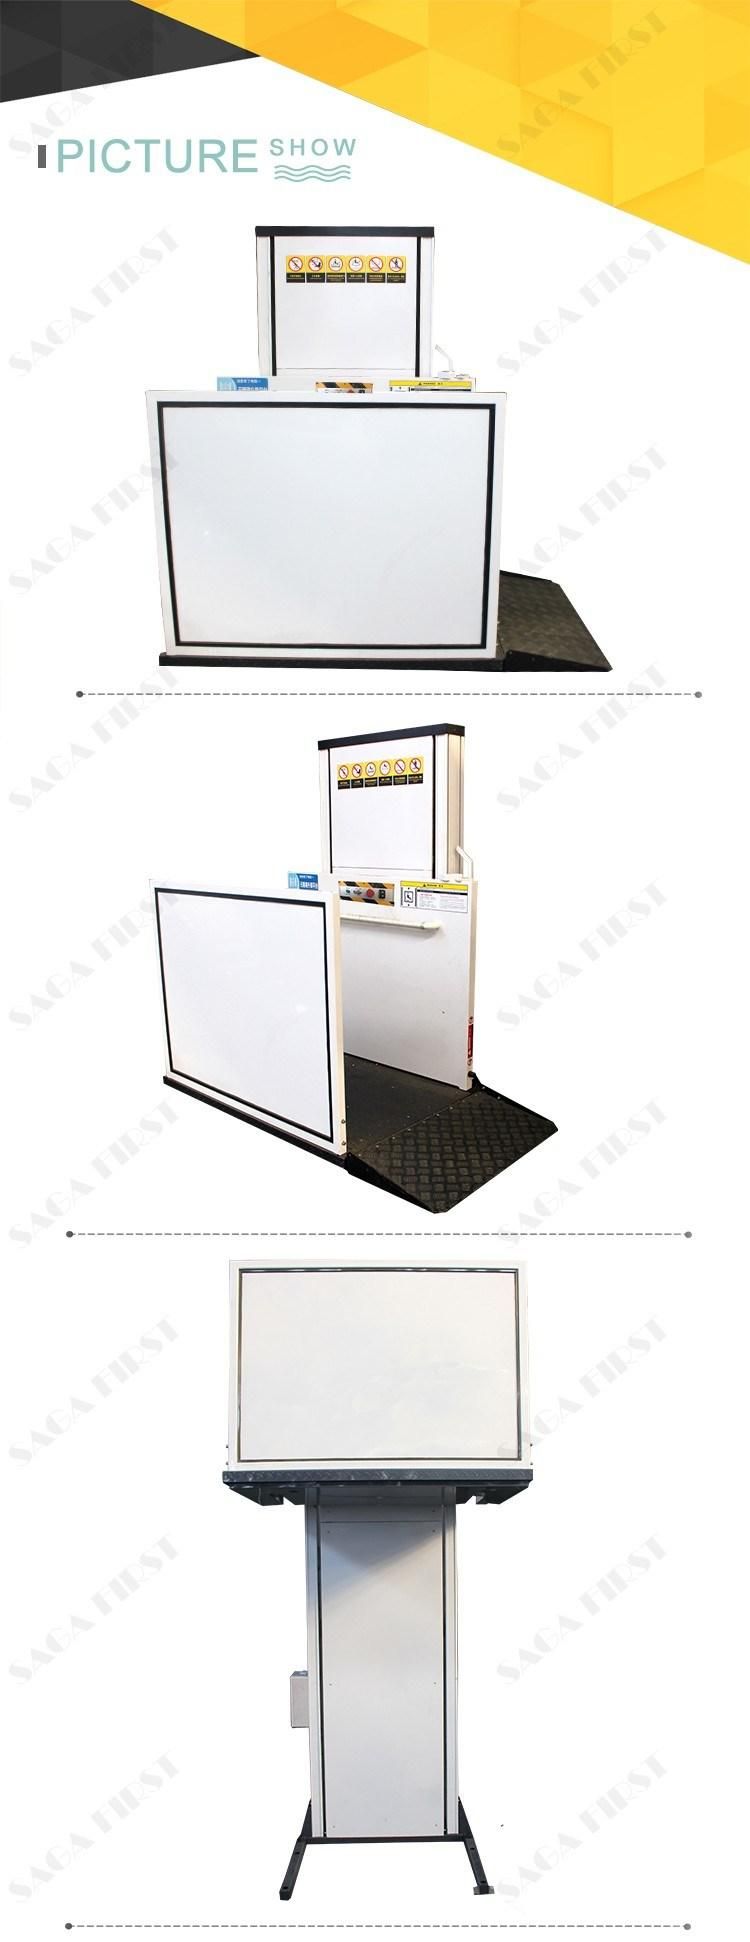 Hydraulic Wheelchair Lift Platform/Vertical Elevator for The Disabled